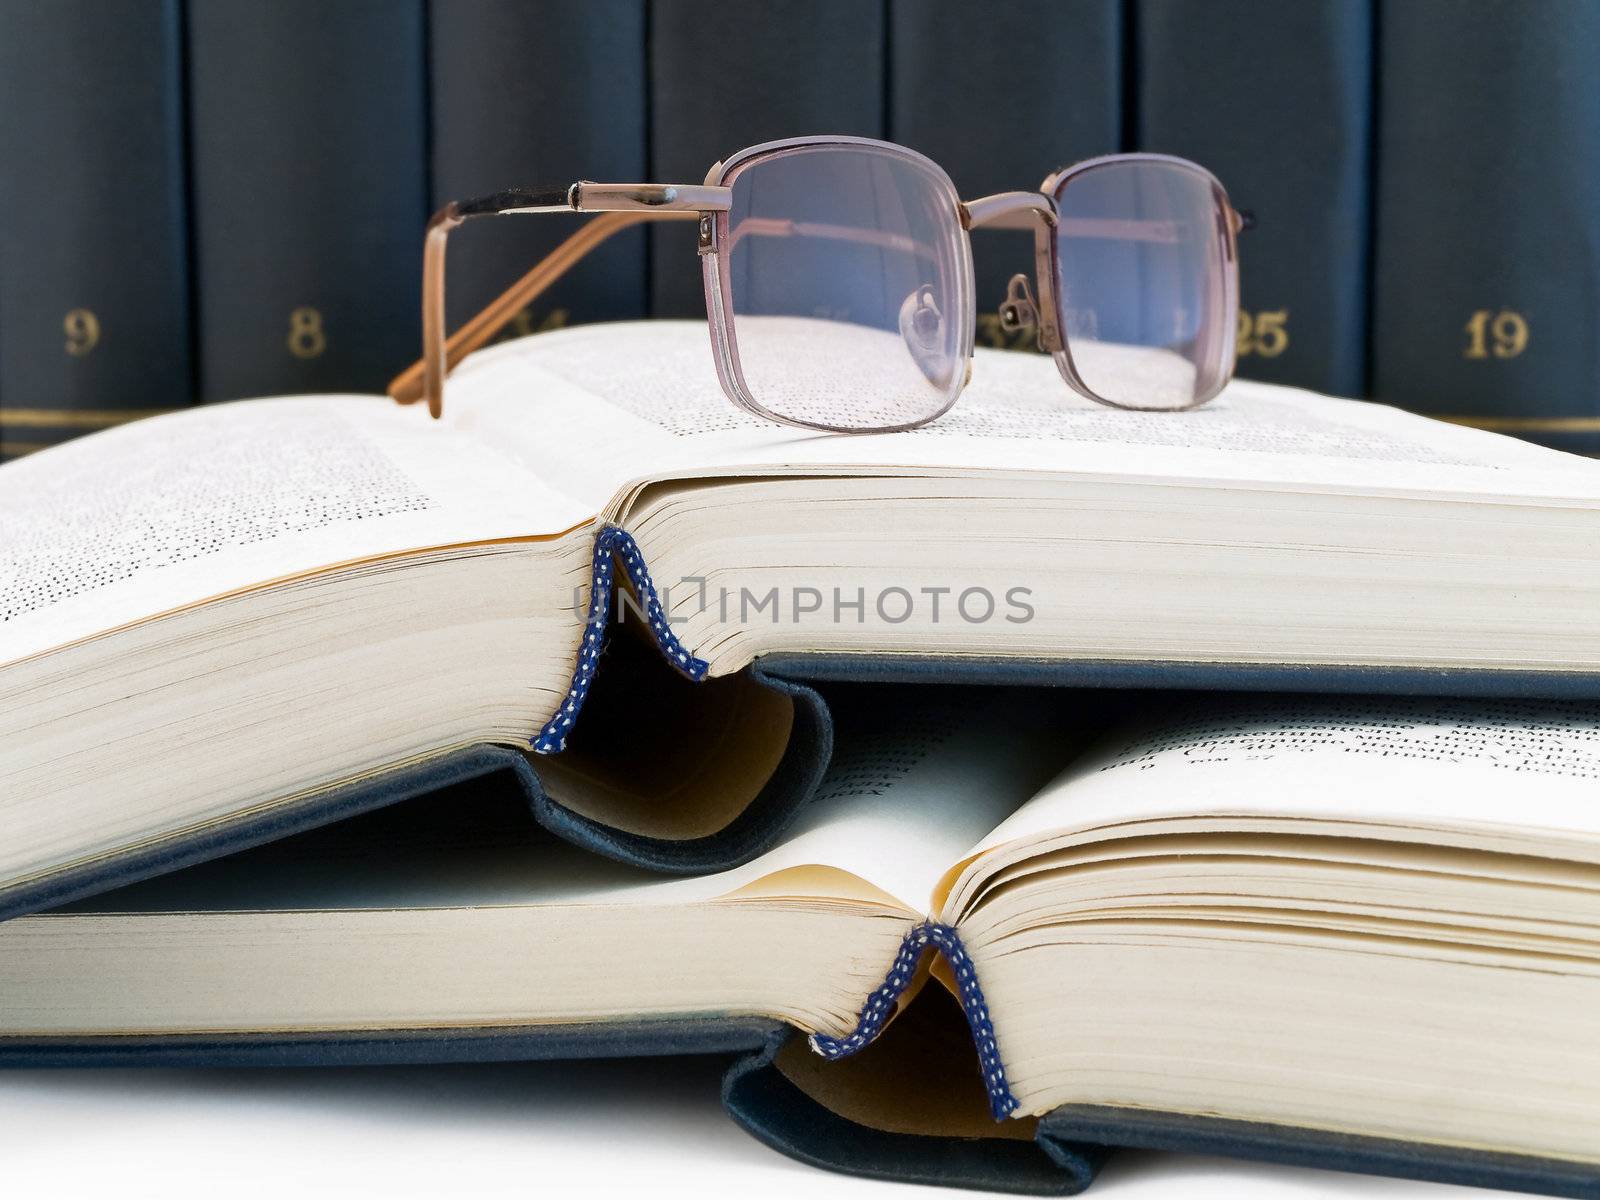 books and glasses against the book shelf